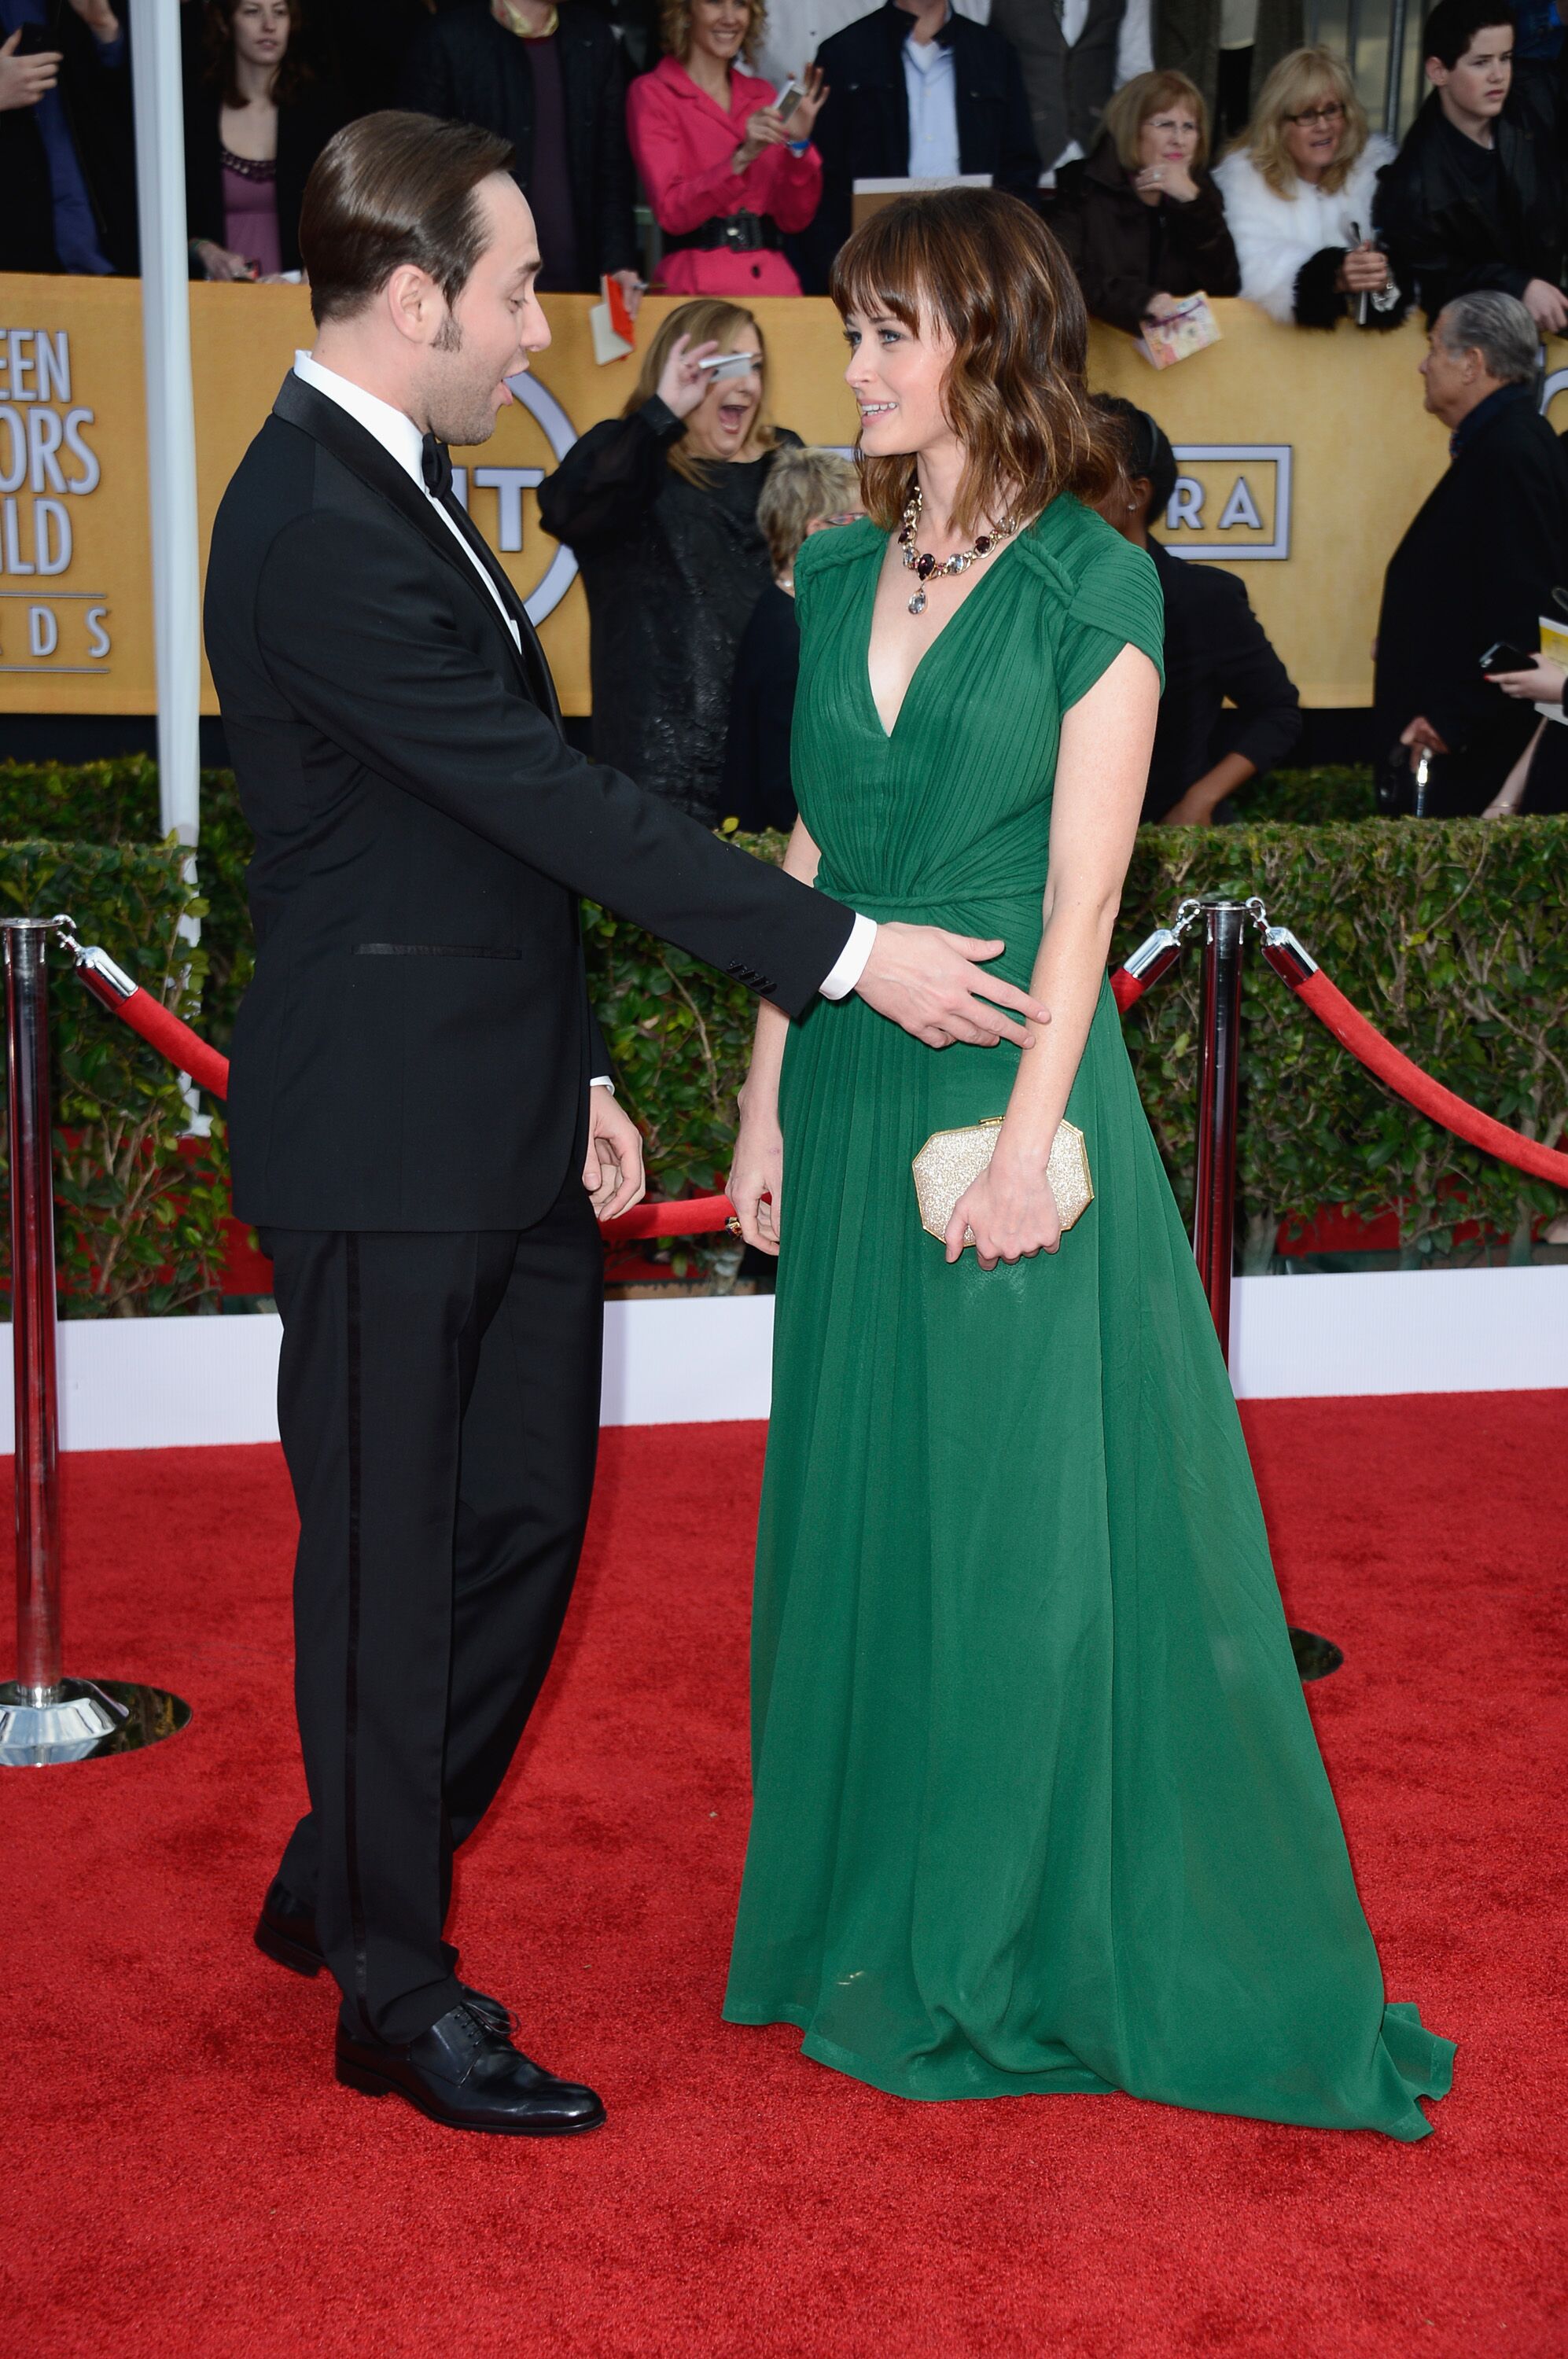  Vincent Kartheiser and Alexis Bledel arrive at the 19th Annual Screen Actors Guild Awards. | Source: Getty Images